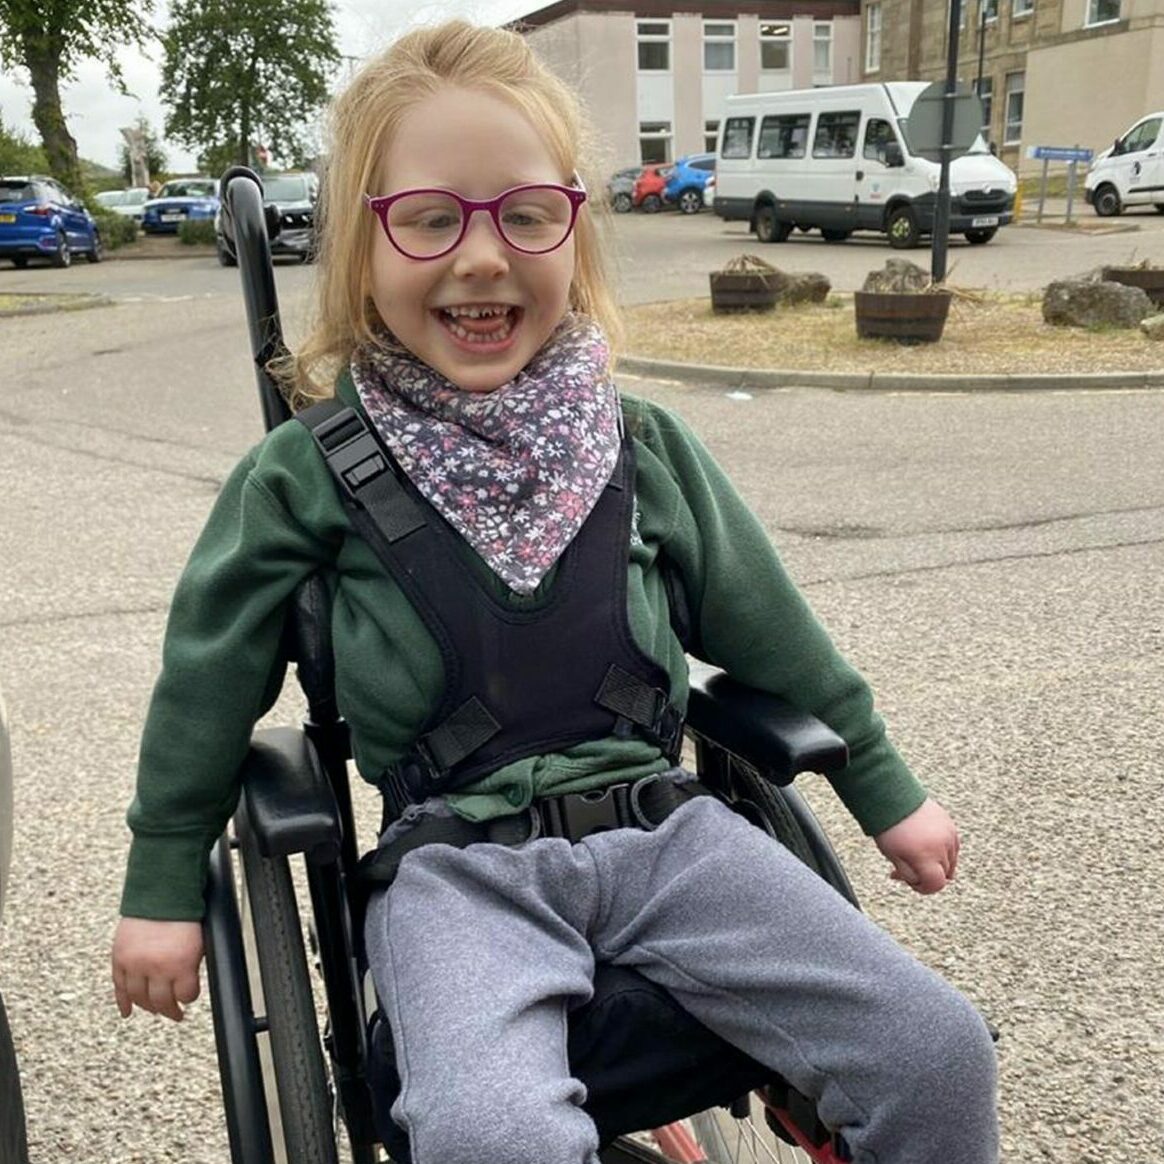 Lola, of Elgin, often faces challenges with accessibility because of her cerebral palsy. Image: Lauren Clark